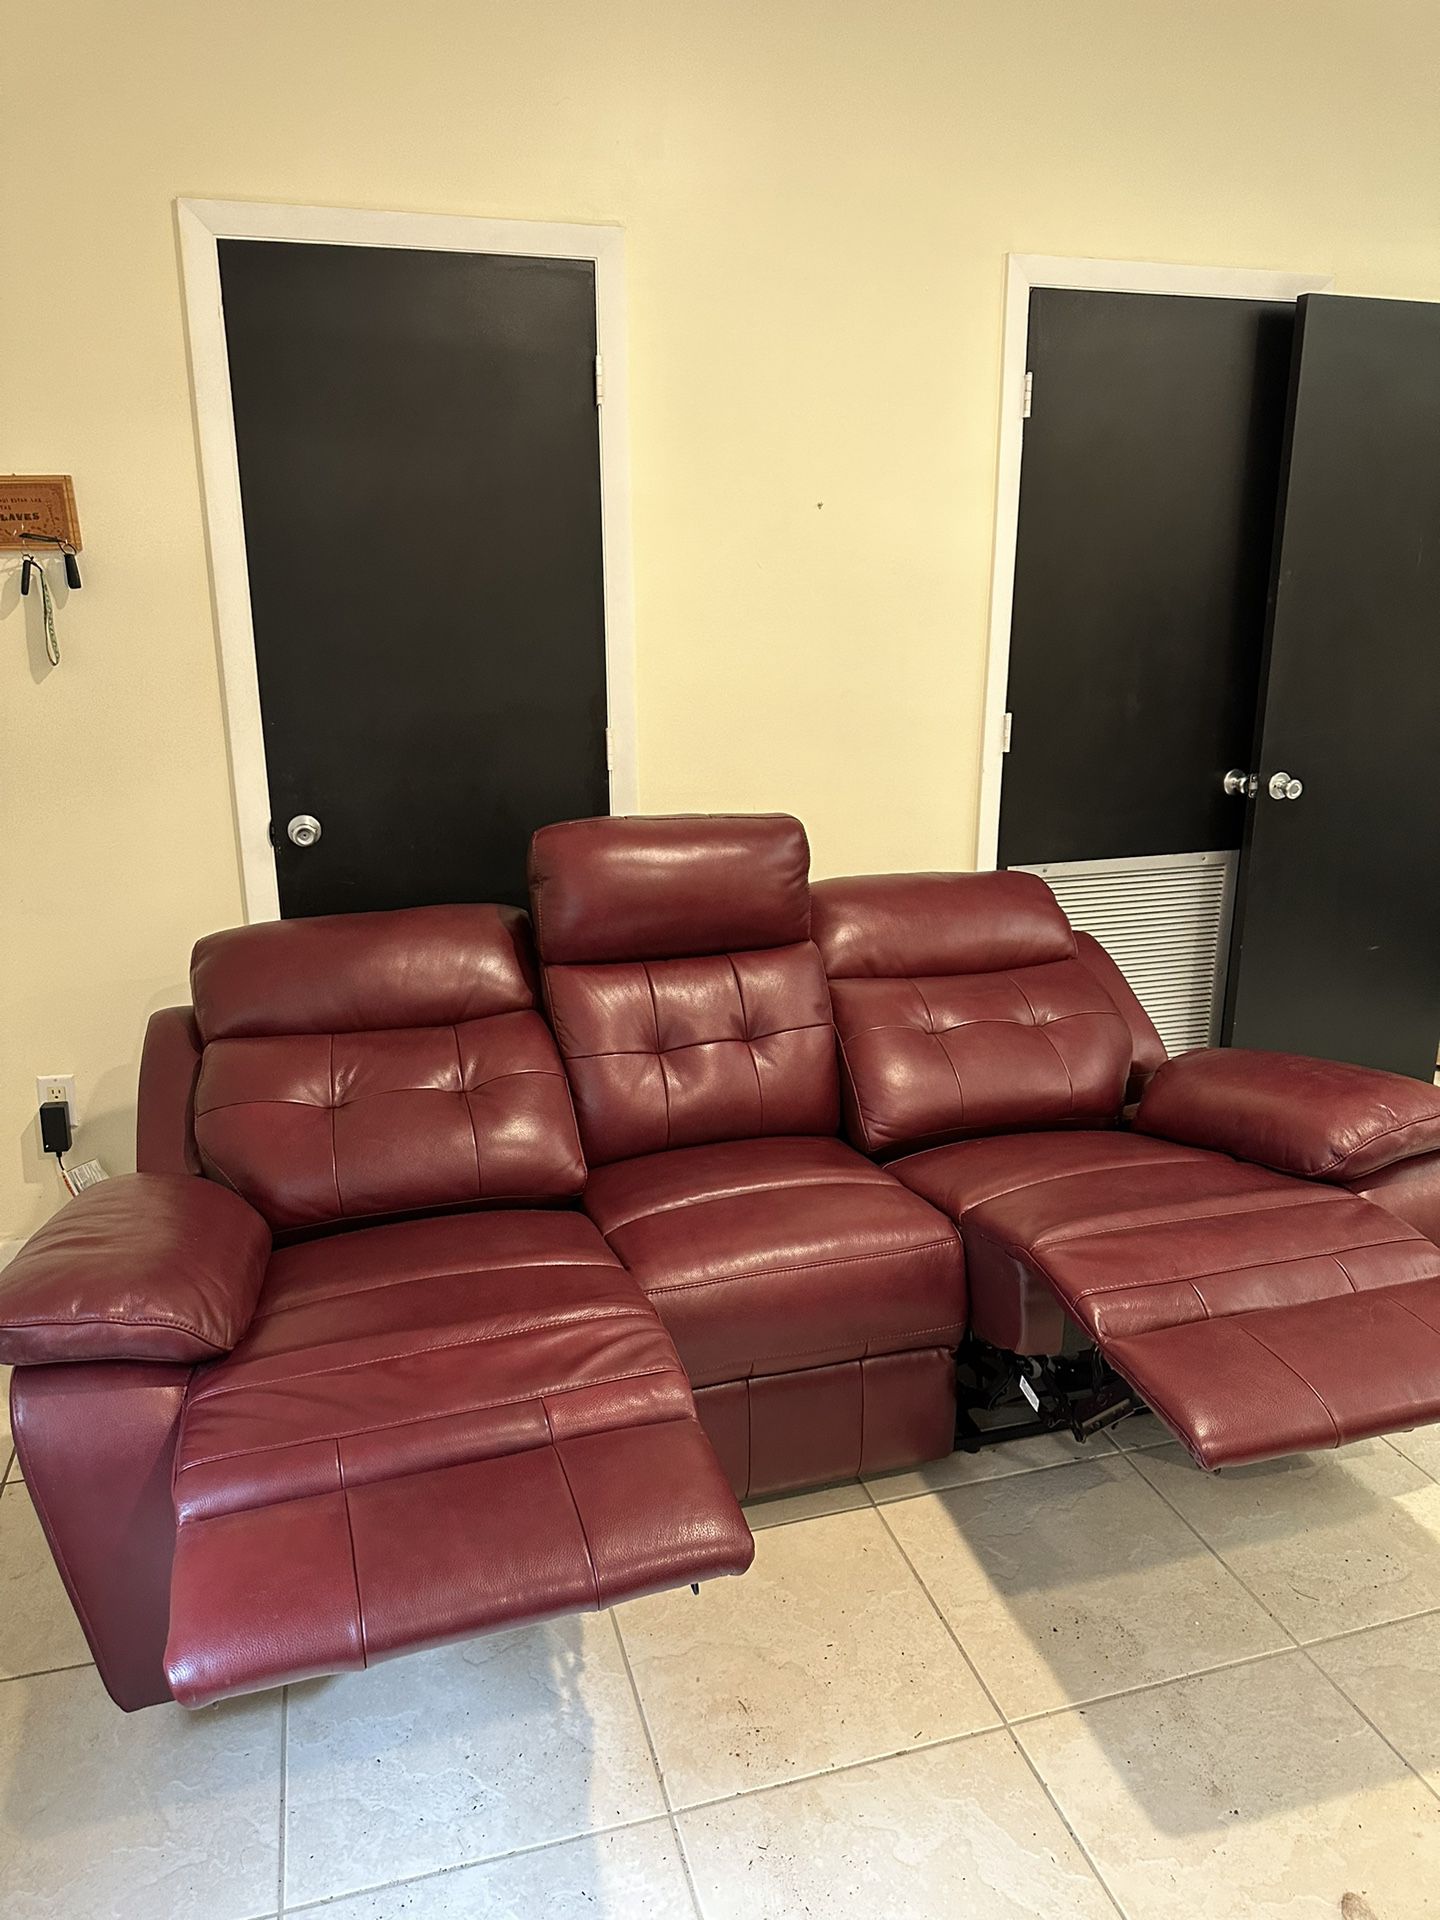 Leather Couch Recliner Almost New!